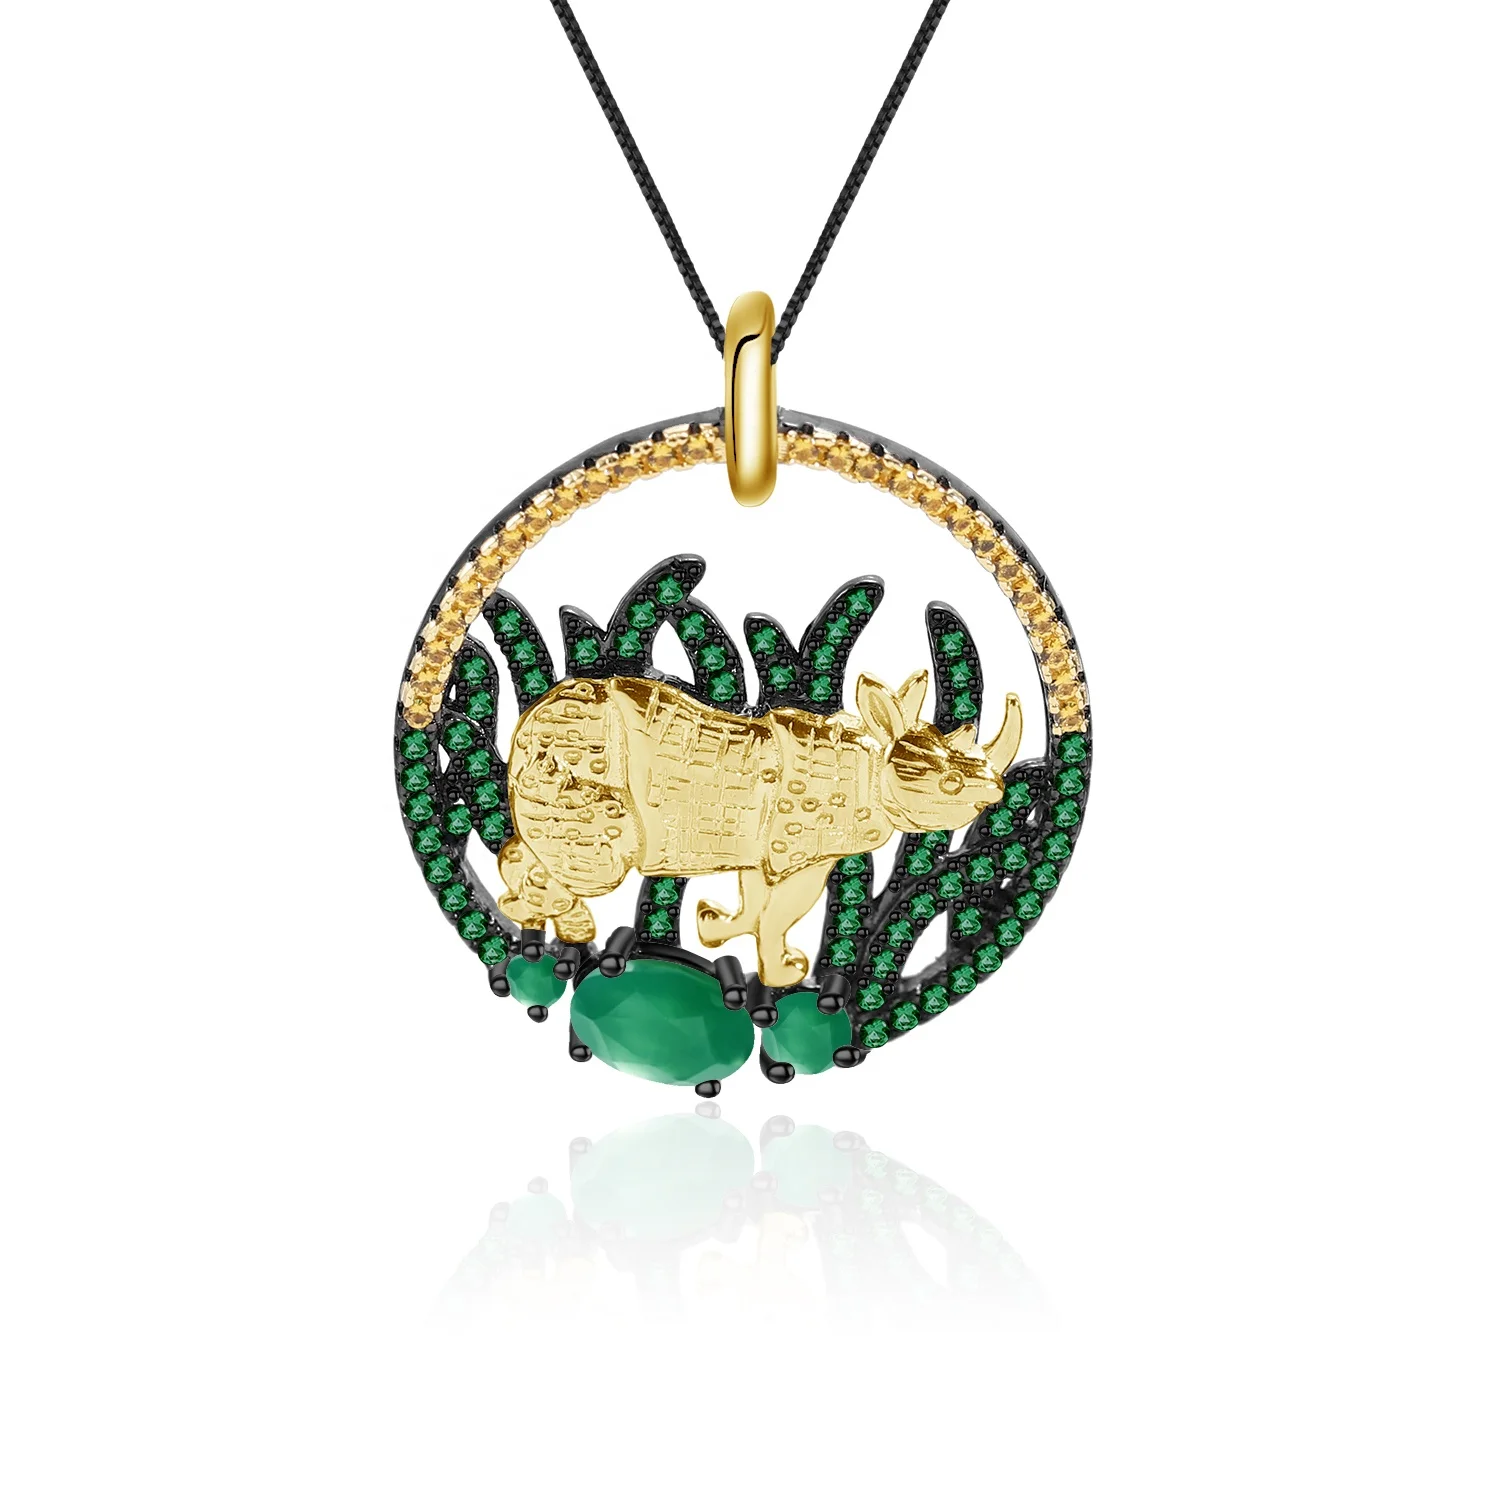 

Abiding Natural Green Agate Golden Rhinoceros Pendant Handcrafted Necklace 925 Sterling Silver Pendent Jewelry